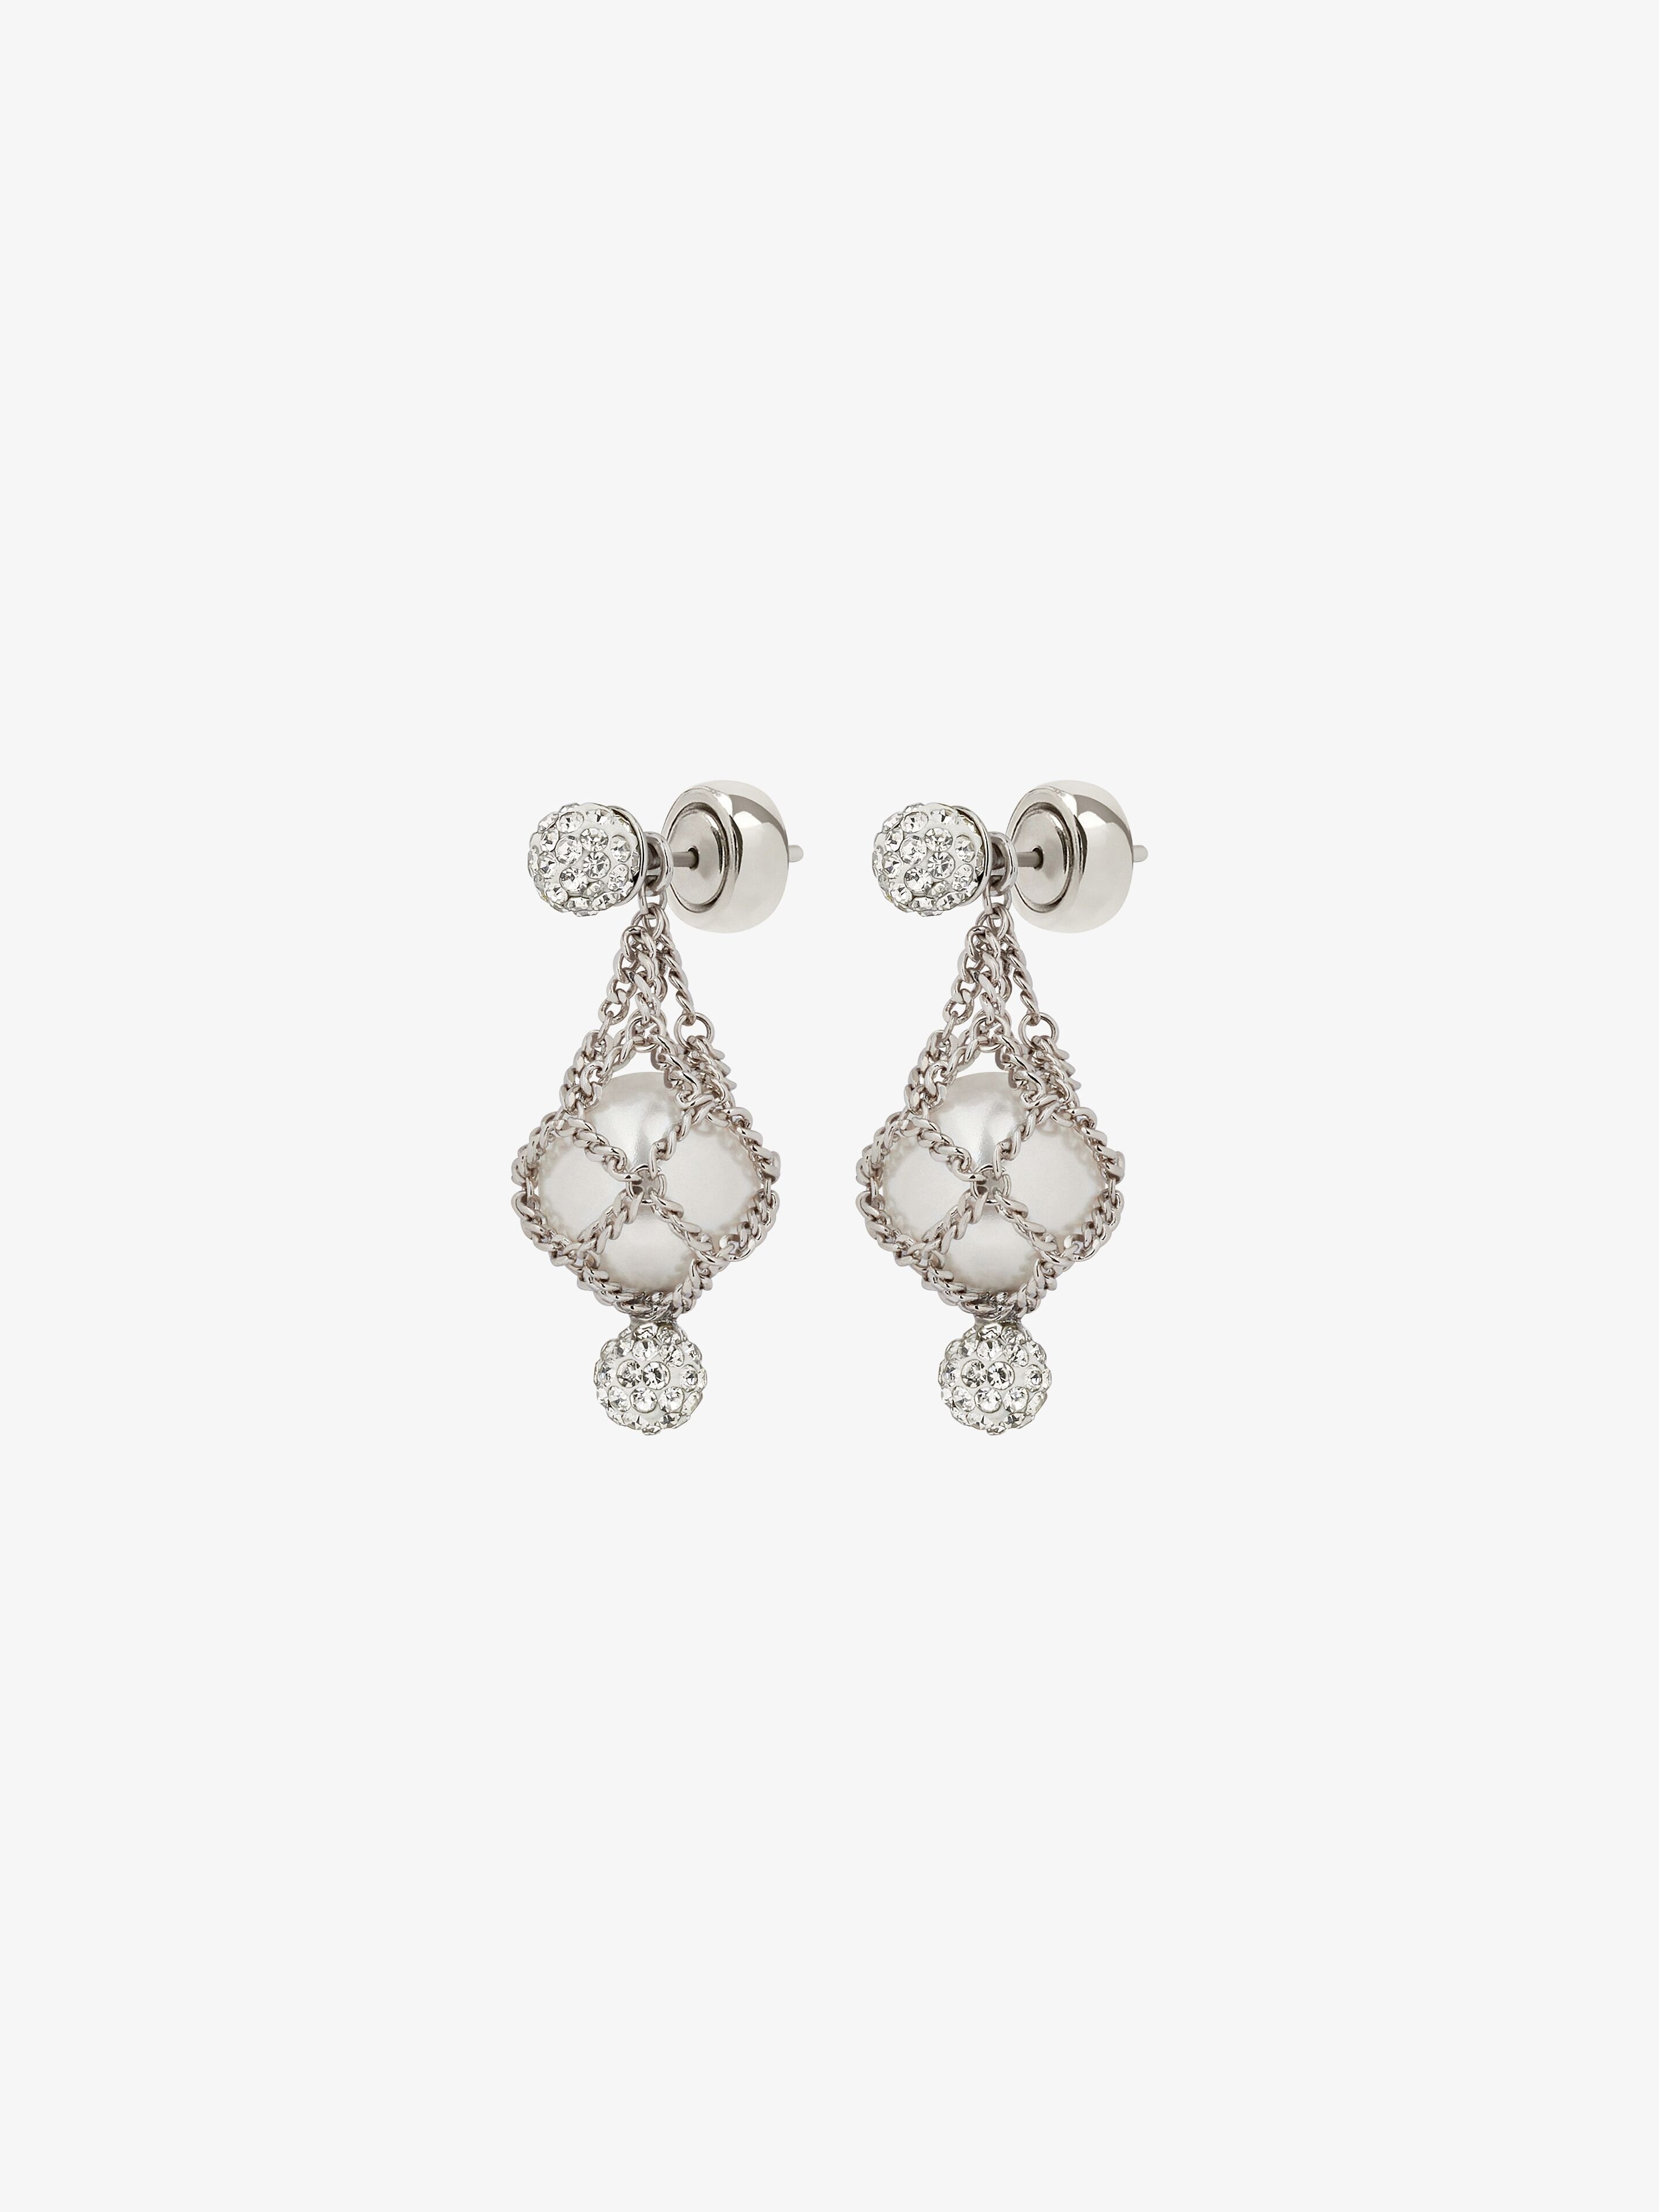 PEARLING EARRINGS IN METAL WITH PEARLS AND CRYSTALS - 4